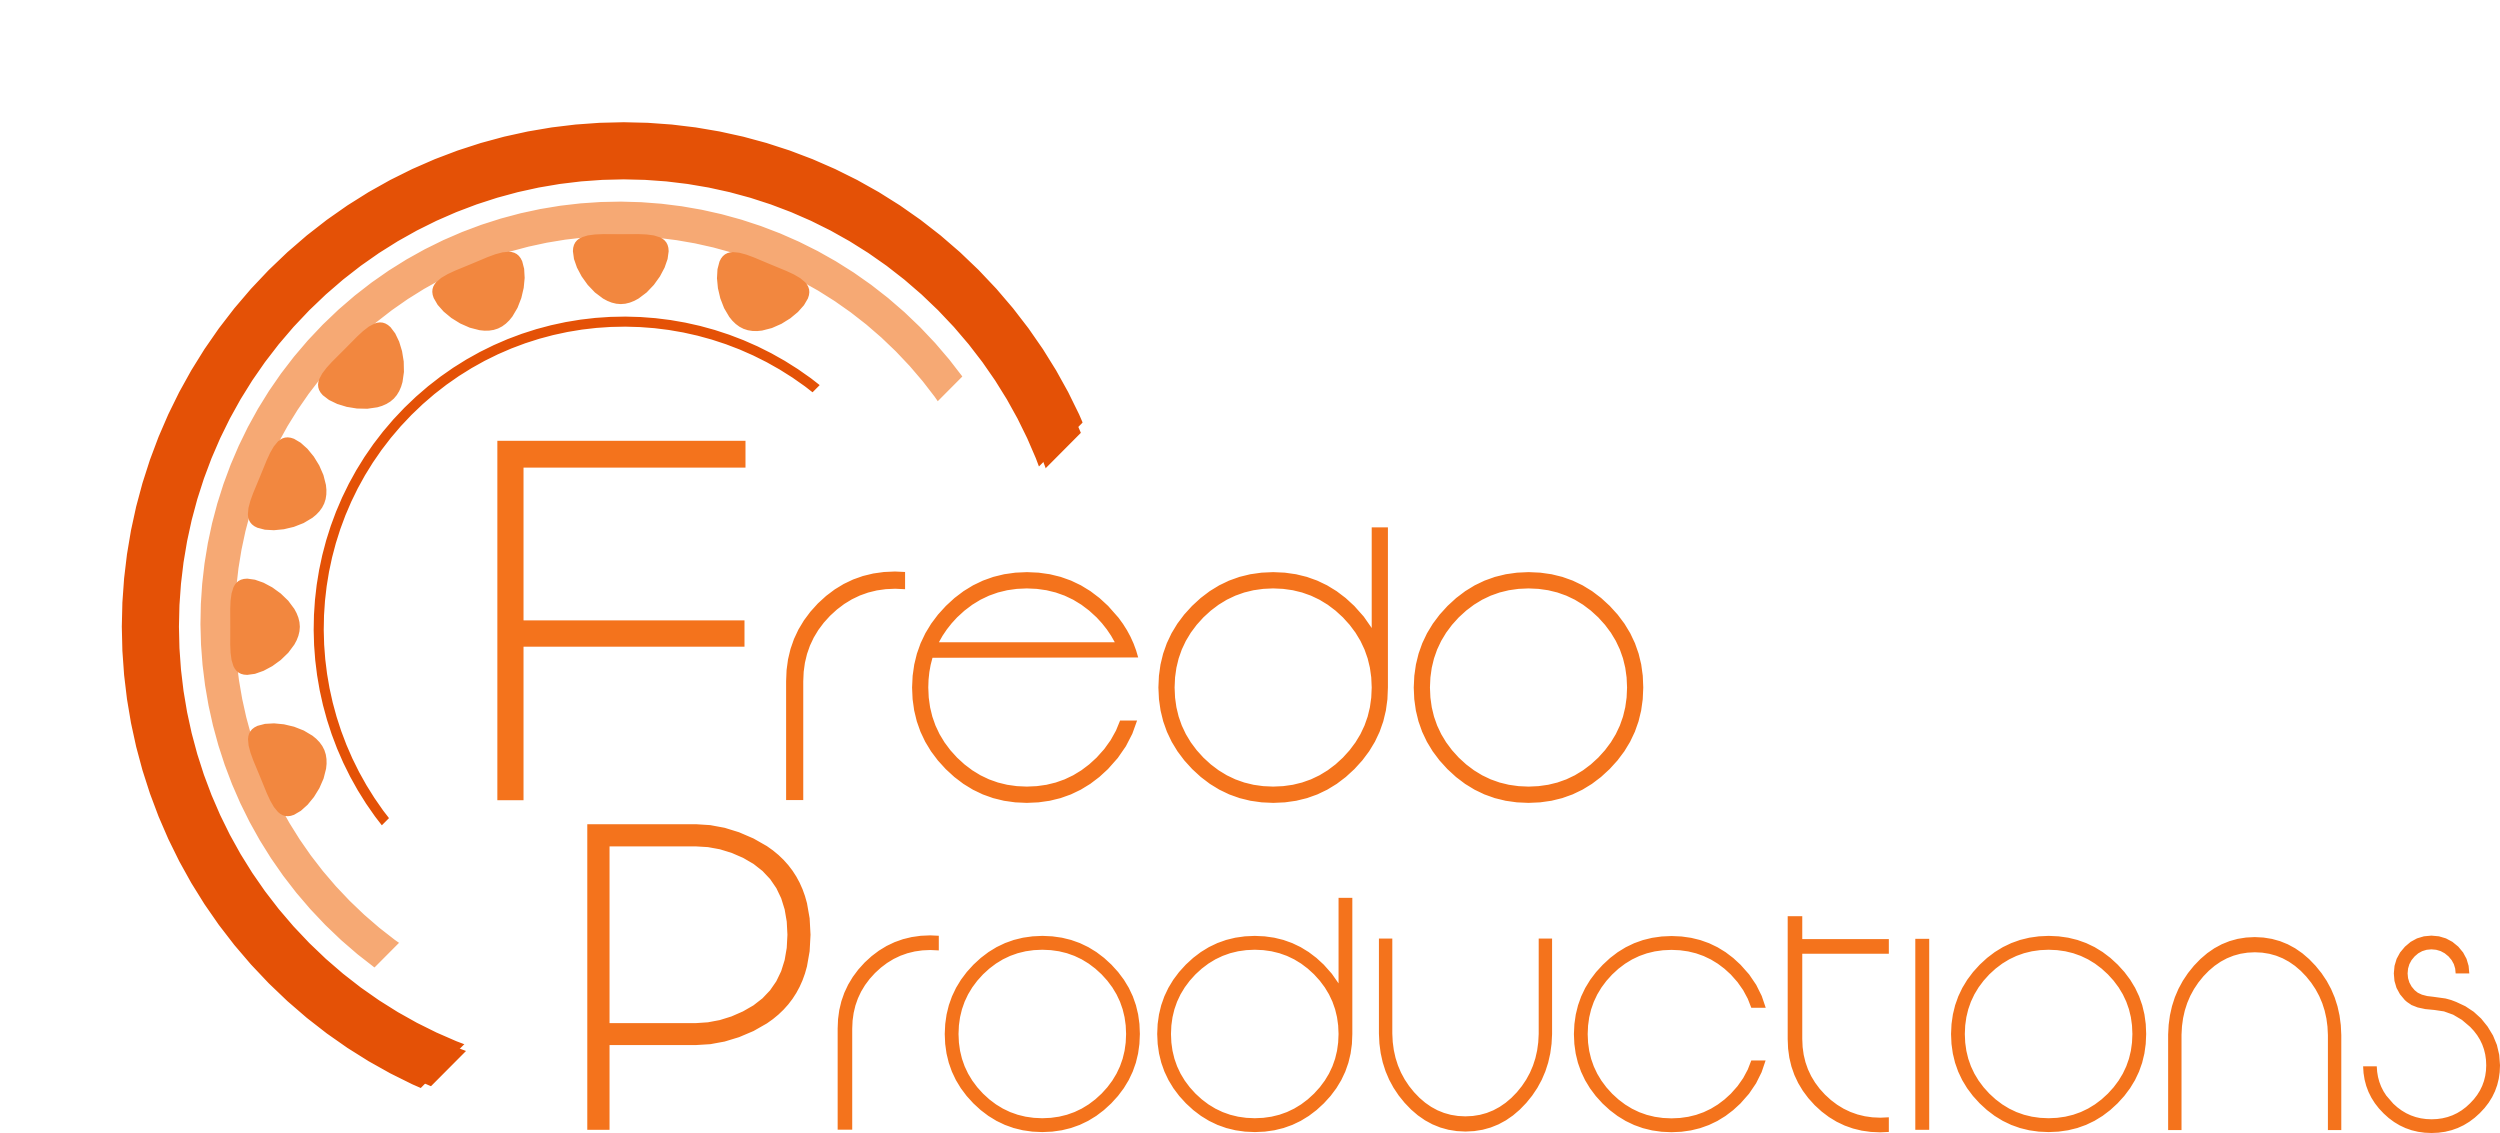 Fredo Productions - Entertainment, Lighting, Selfie Stations, Event Production